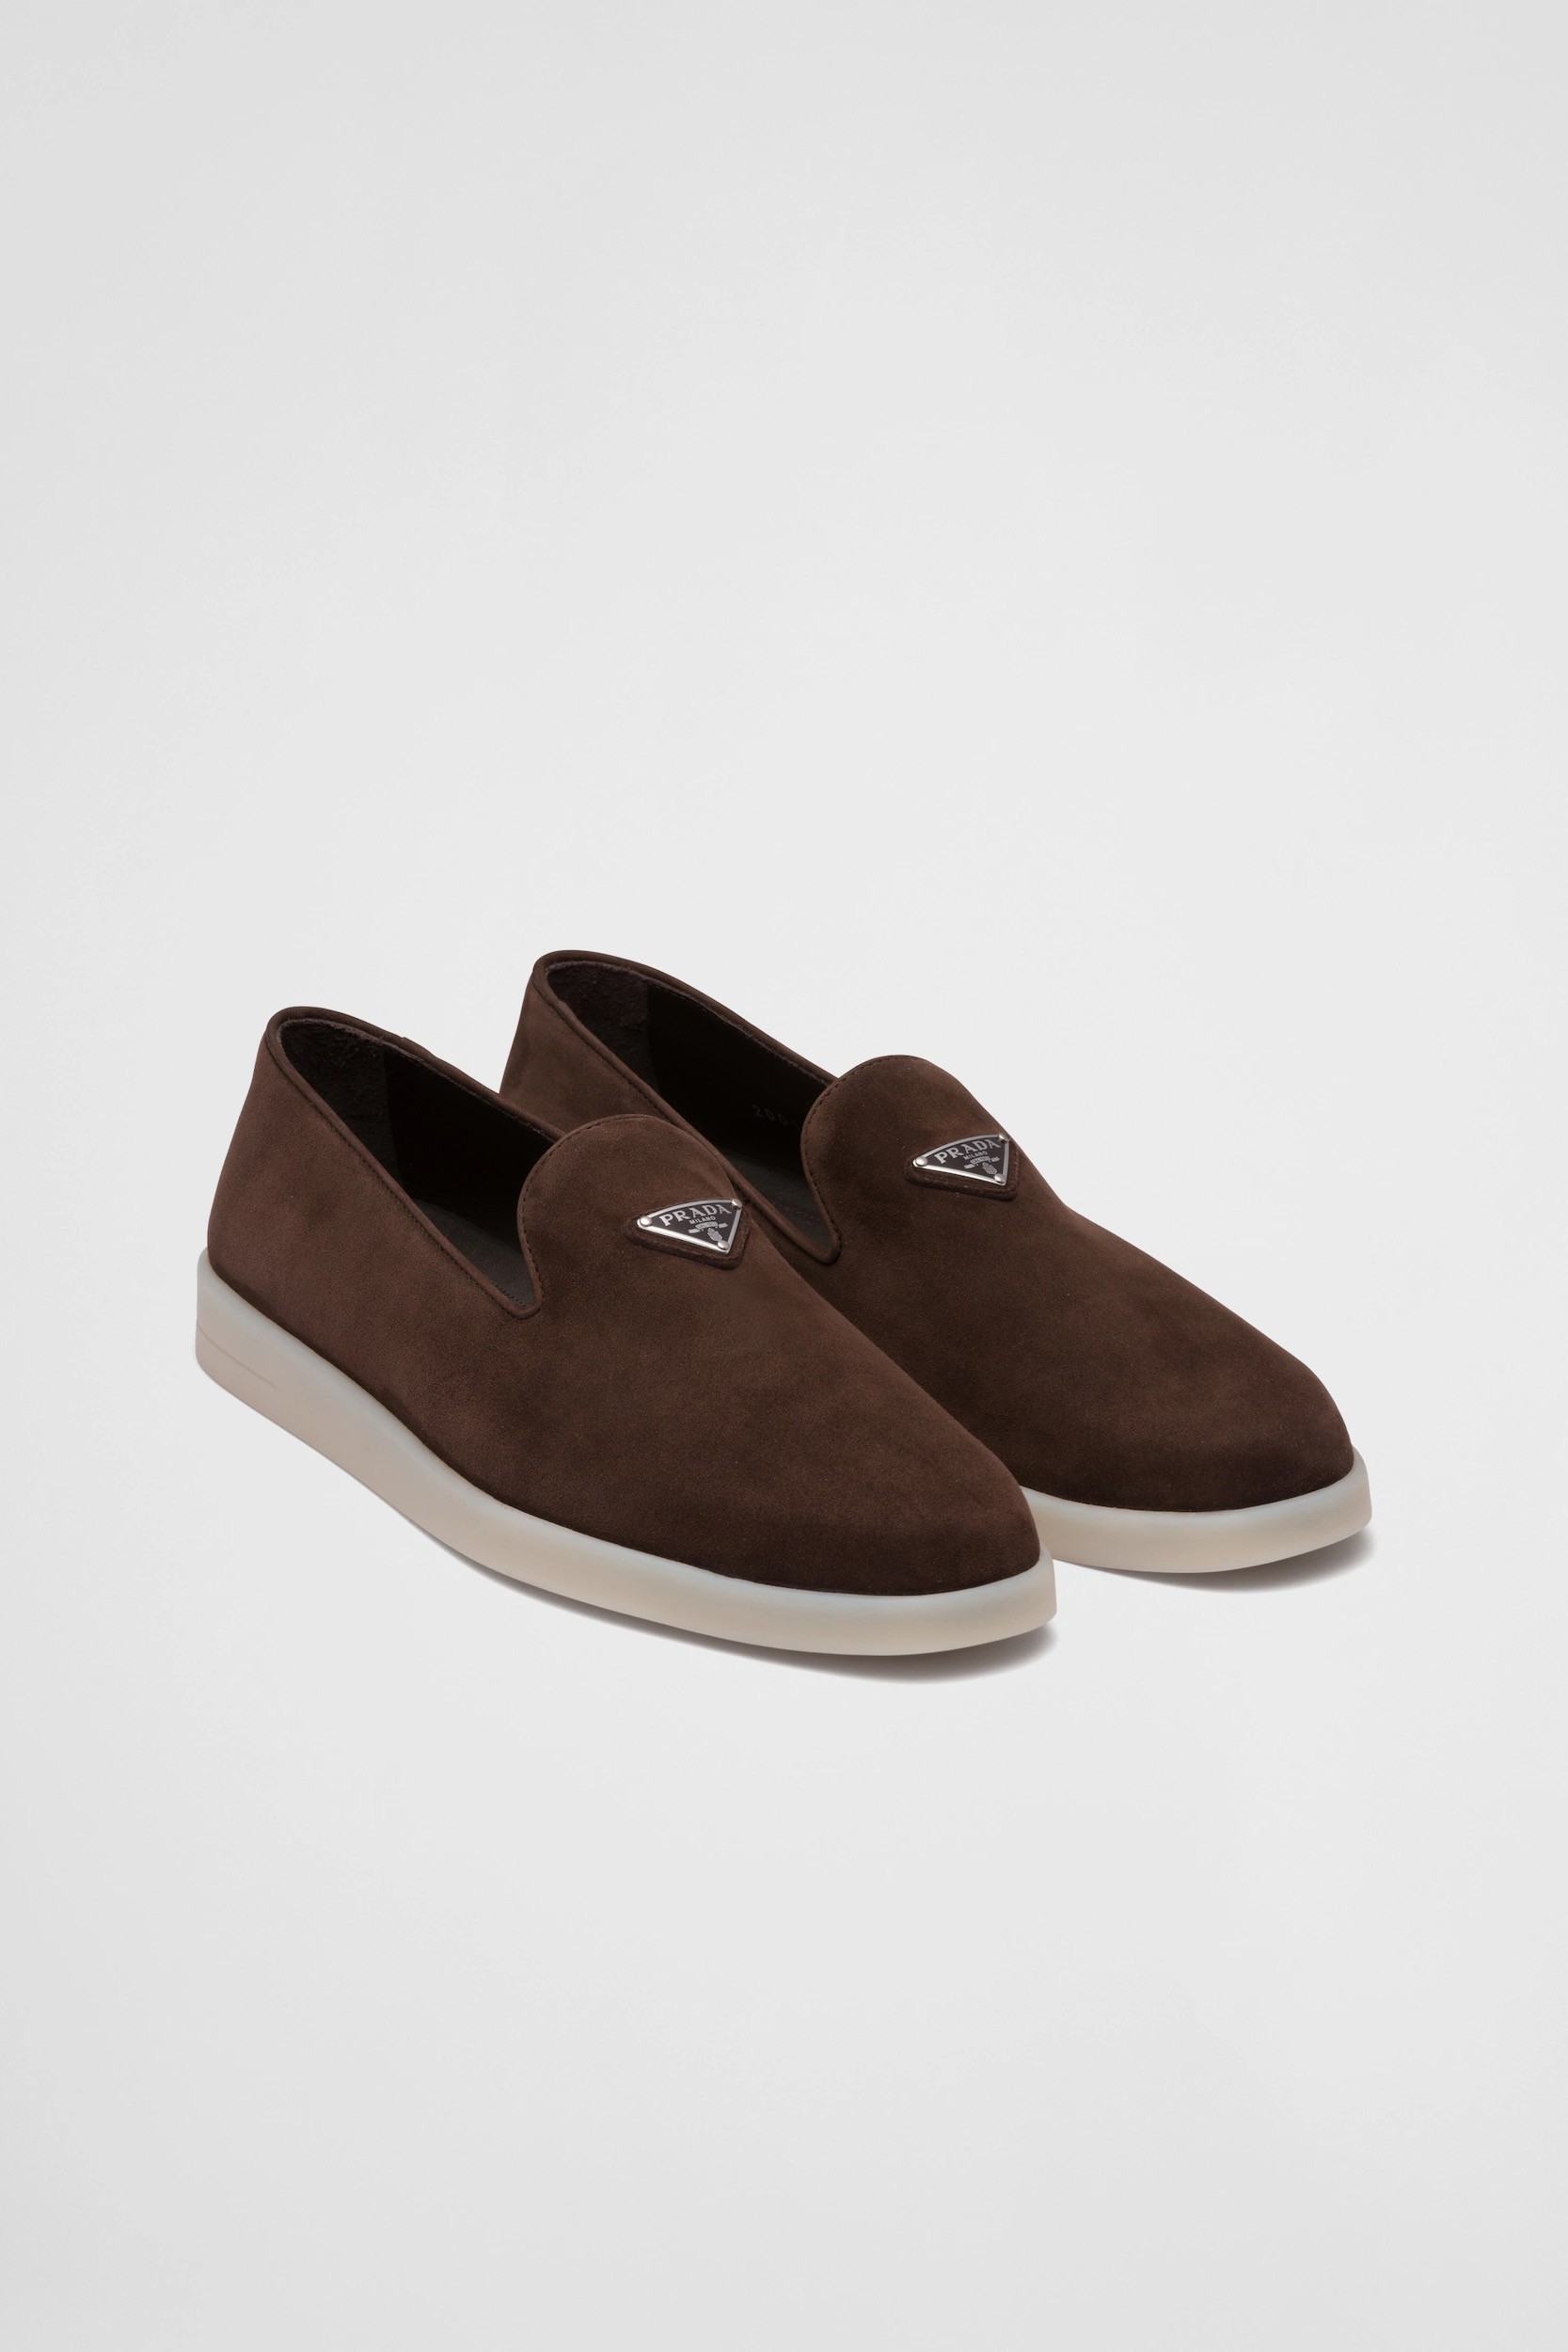 Suede Slip-On Casual Loafers - Dark Brown